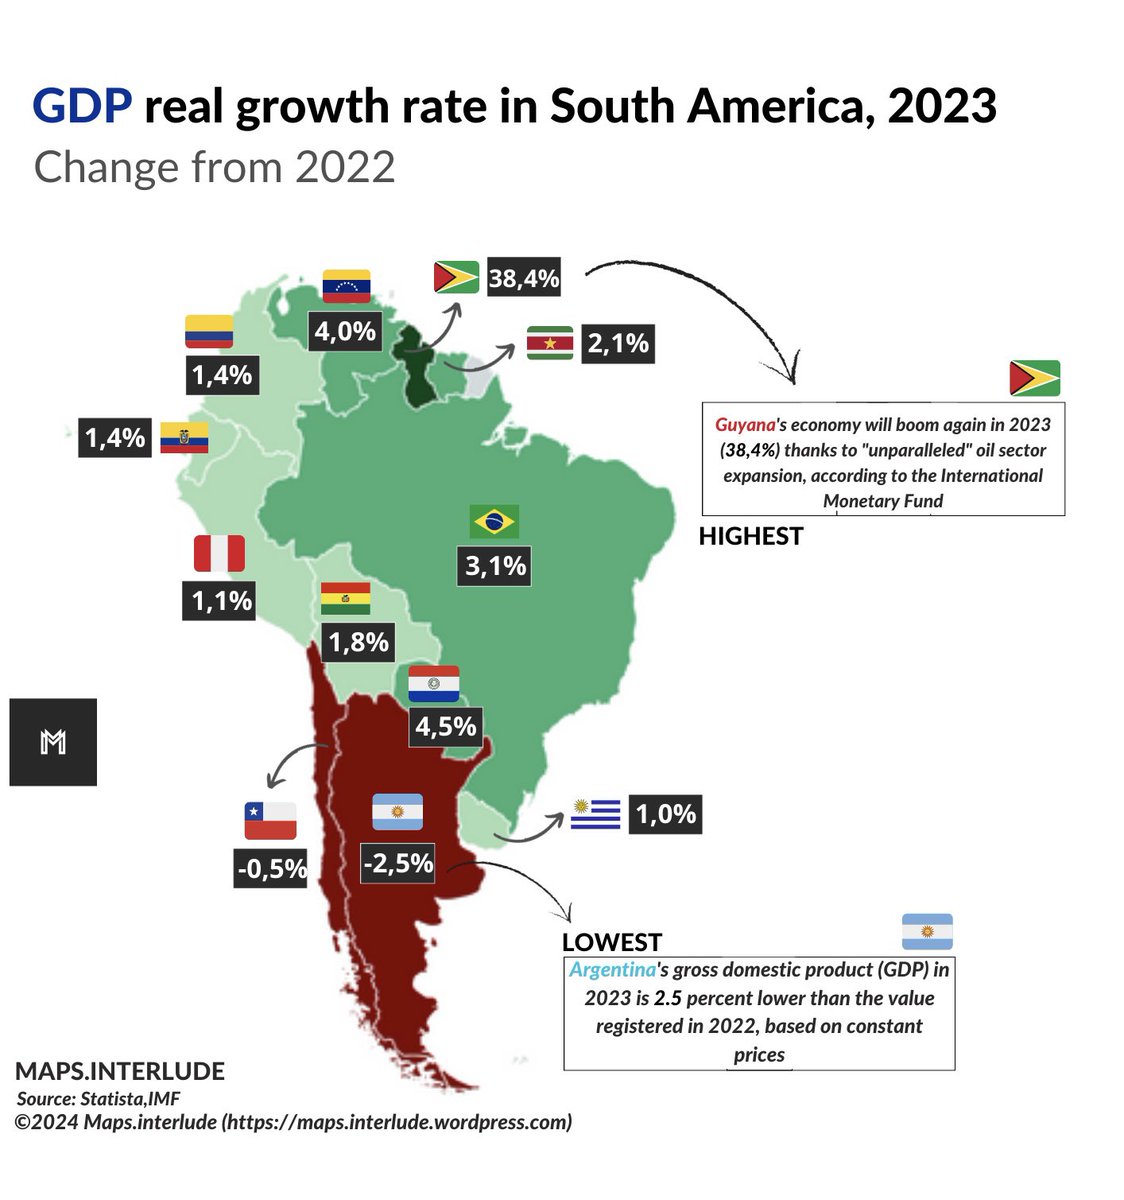 #GDP real #growth rate in #SouthAmerica, 2023 | Change from 2022
~
Highest: 🇬🇾#Guyana 38,4% 
•
Lowest: 🇦🇷#Argentina -2,5%
•
#maps #gdpgrowth #mapa